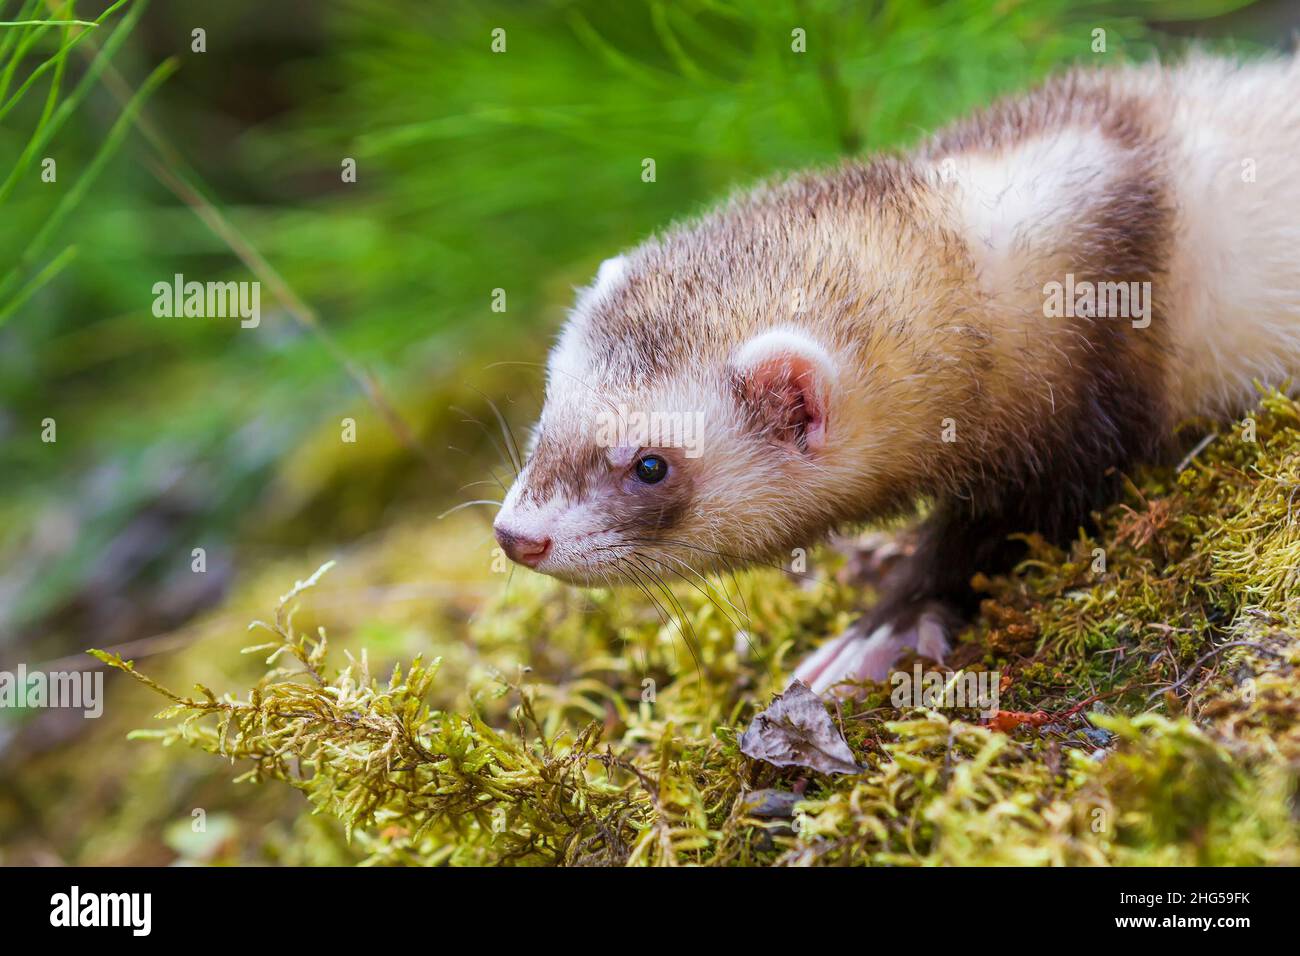 Mustela putorius furo - A ferret in the forest has an open mouth and a protruding tongue. Photo with nice bokeh. Stock Photo